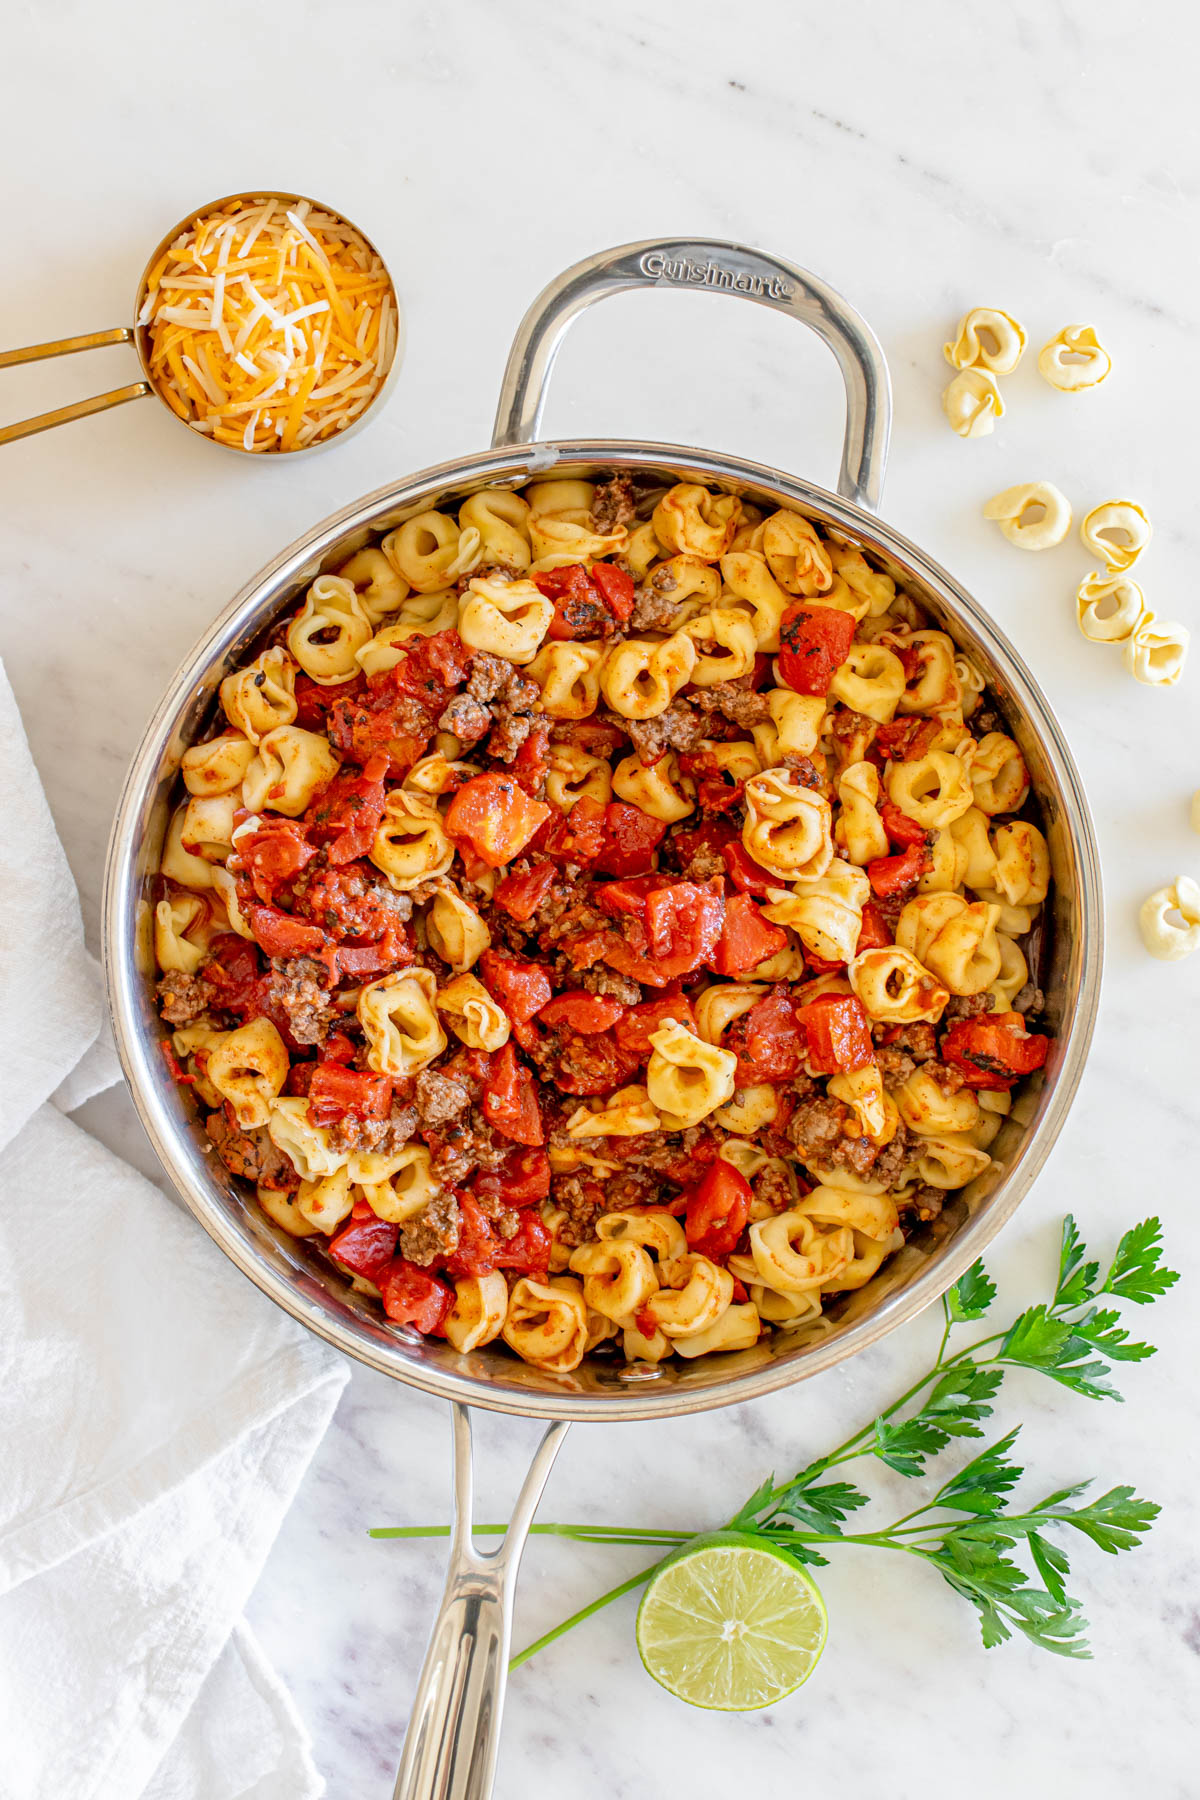 A skillet full of pasta with meat and tomatoes.